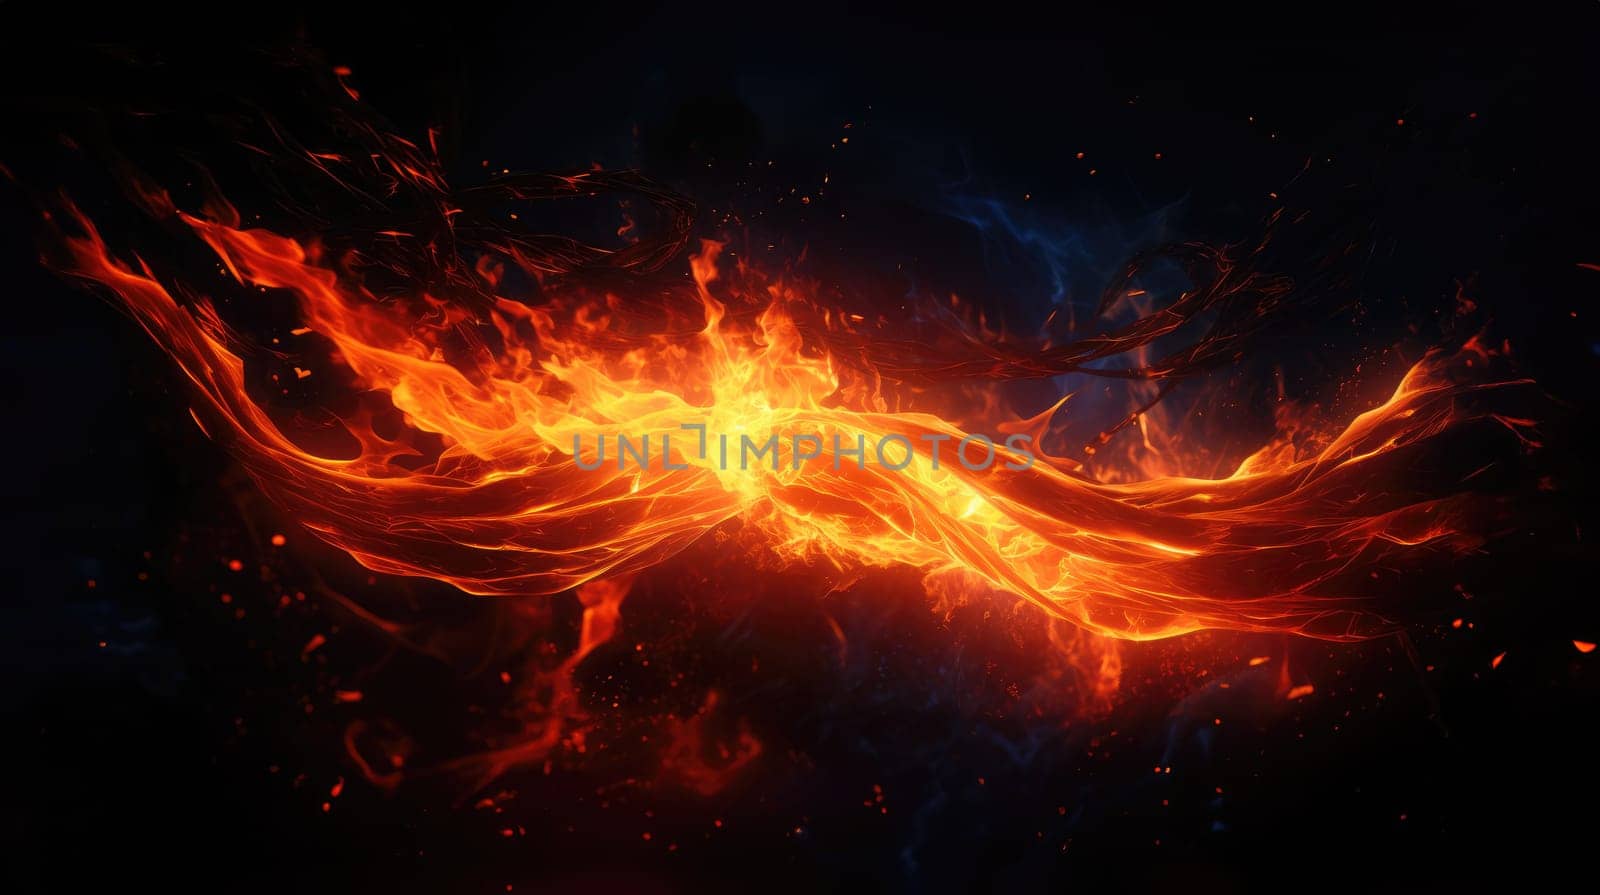 Abstract background with fire flames on dark background